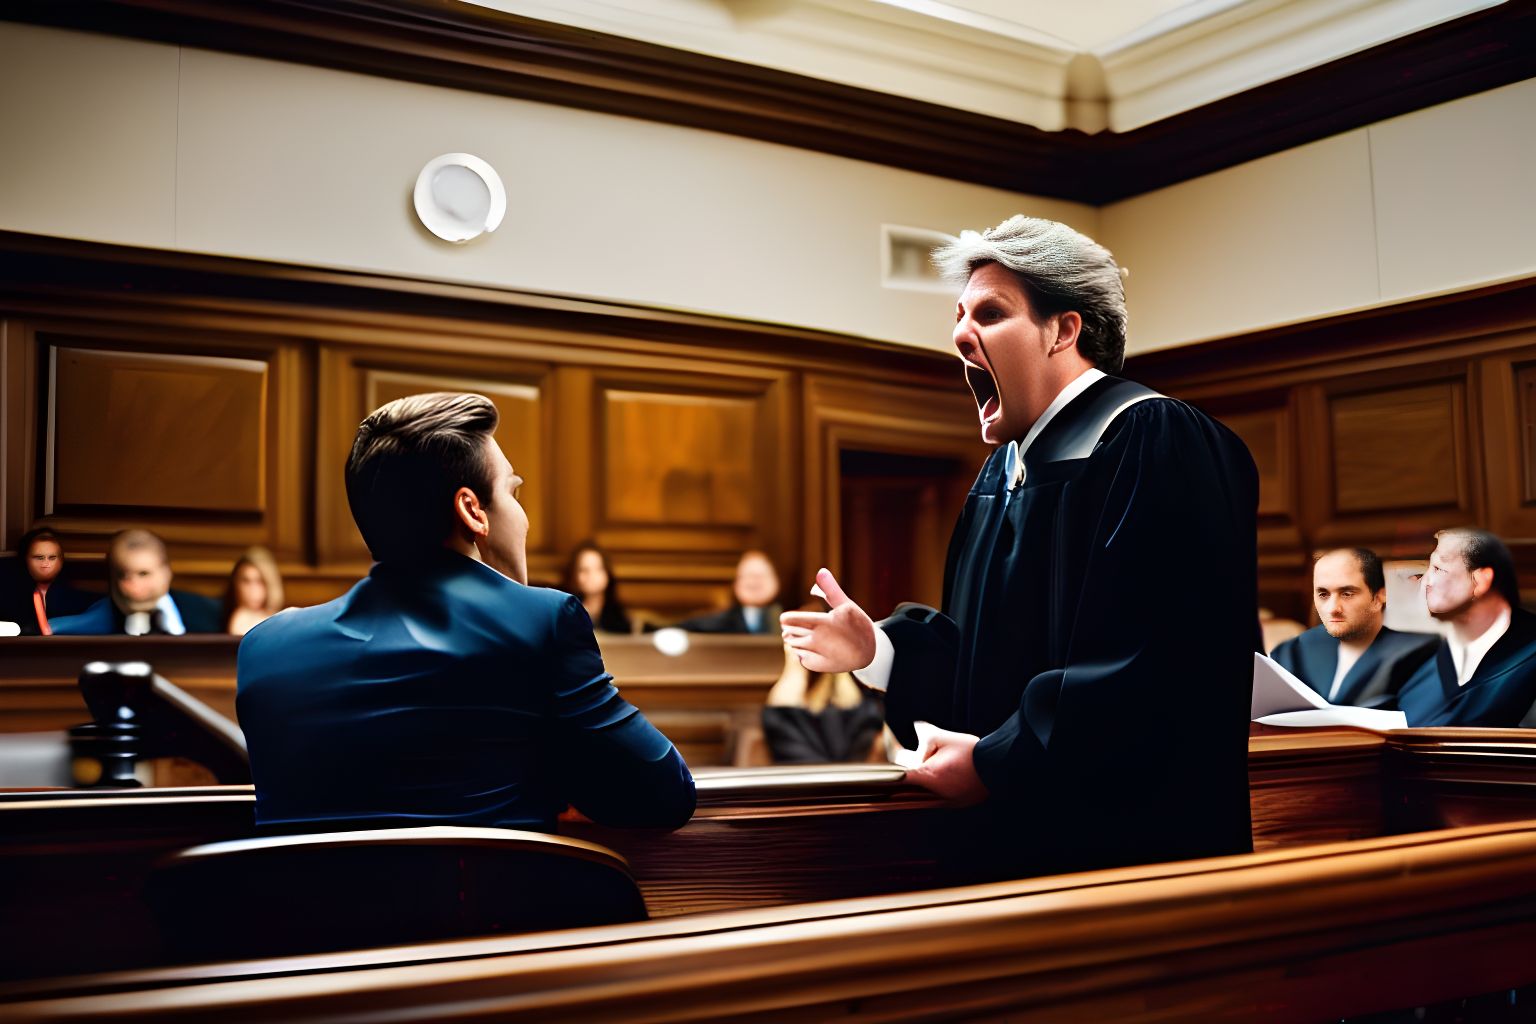 Breathtaking photograph of a lawyer arguing passionately in court